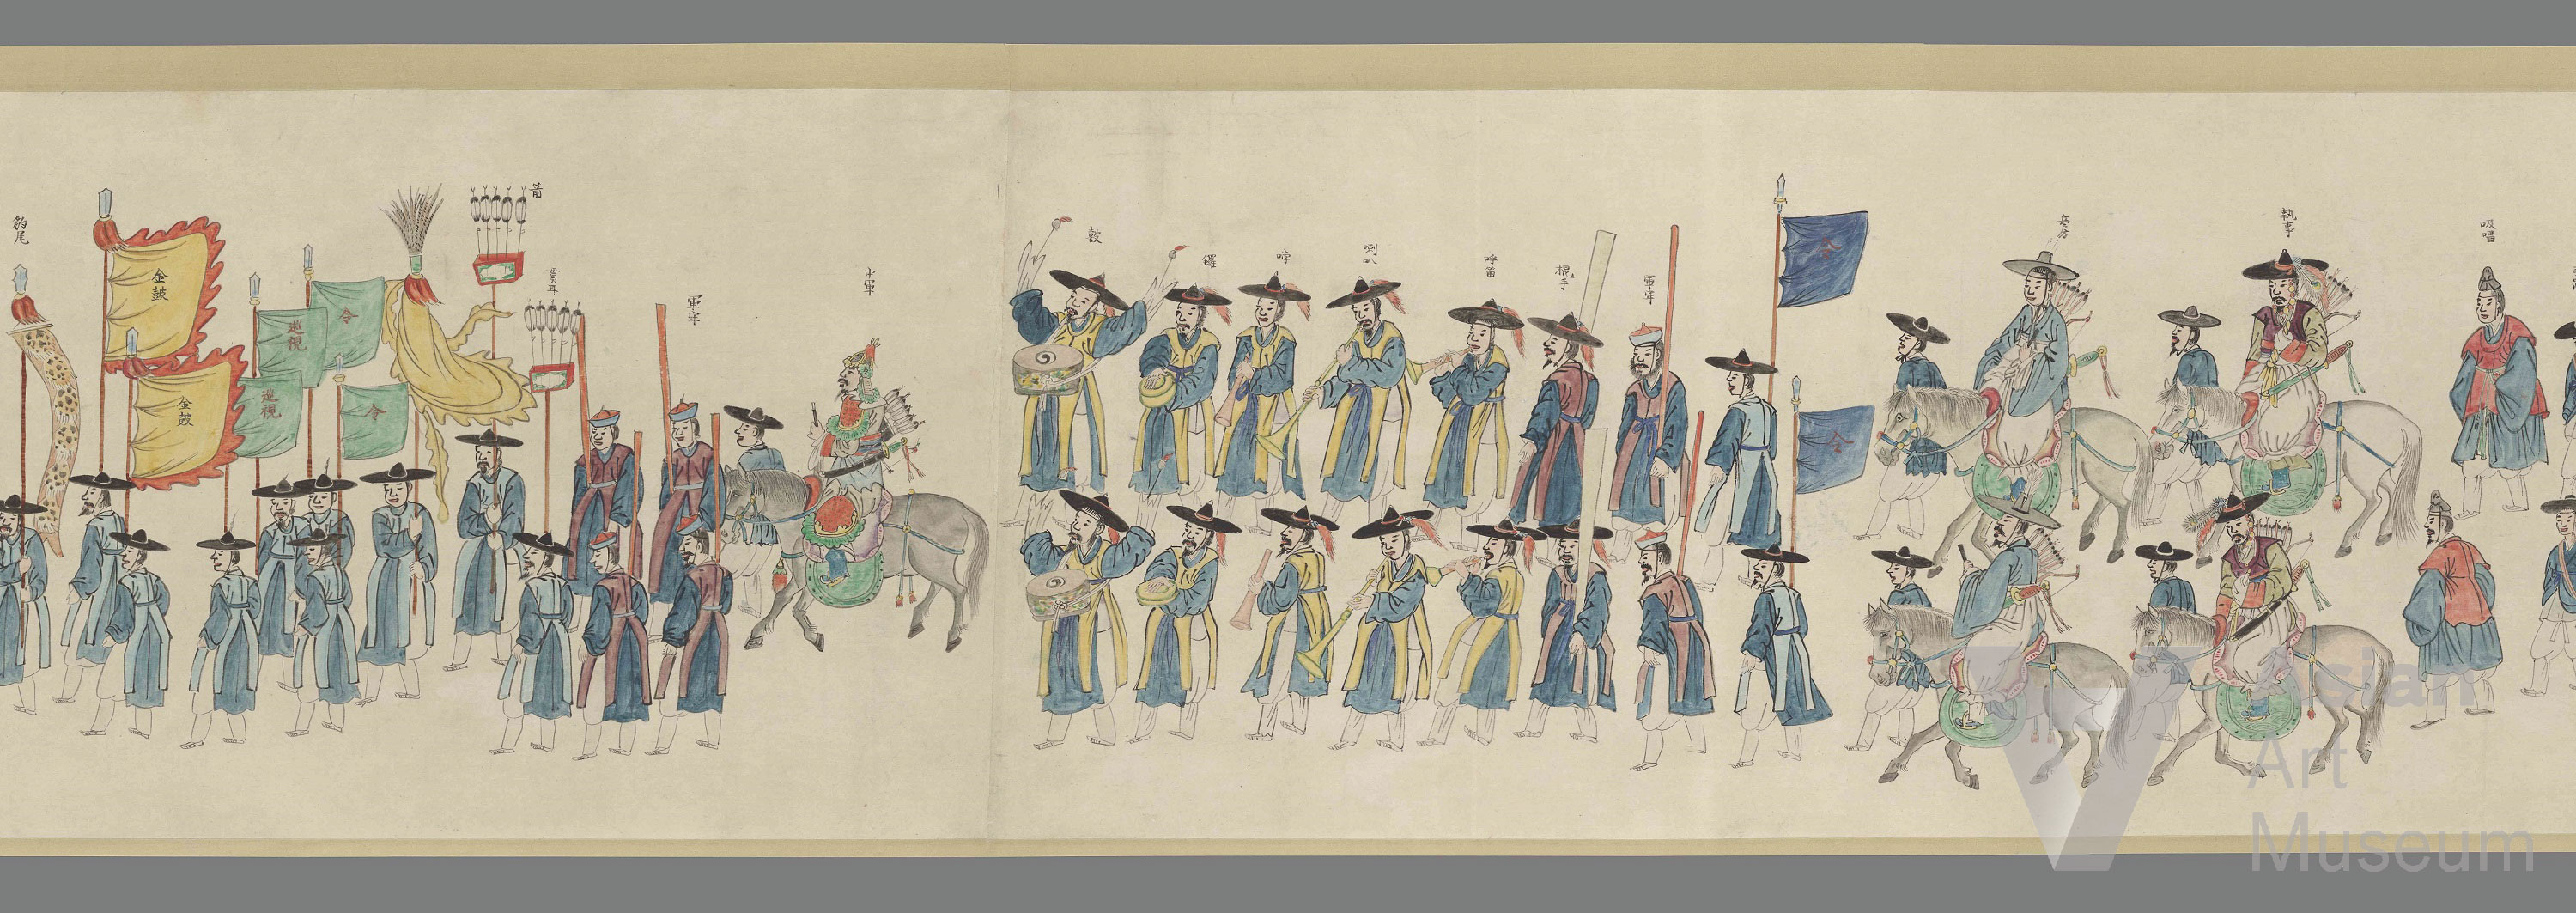 Procession to Anneung